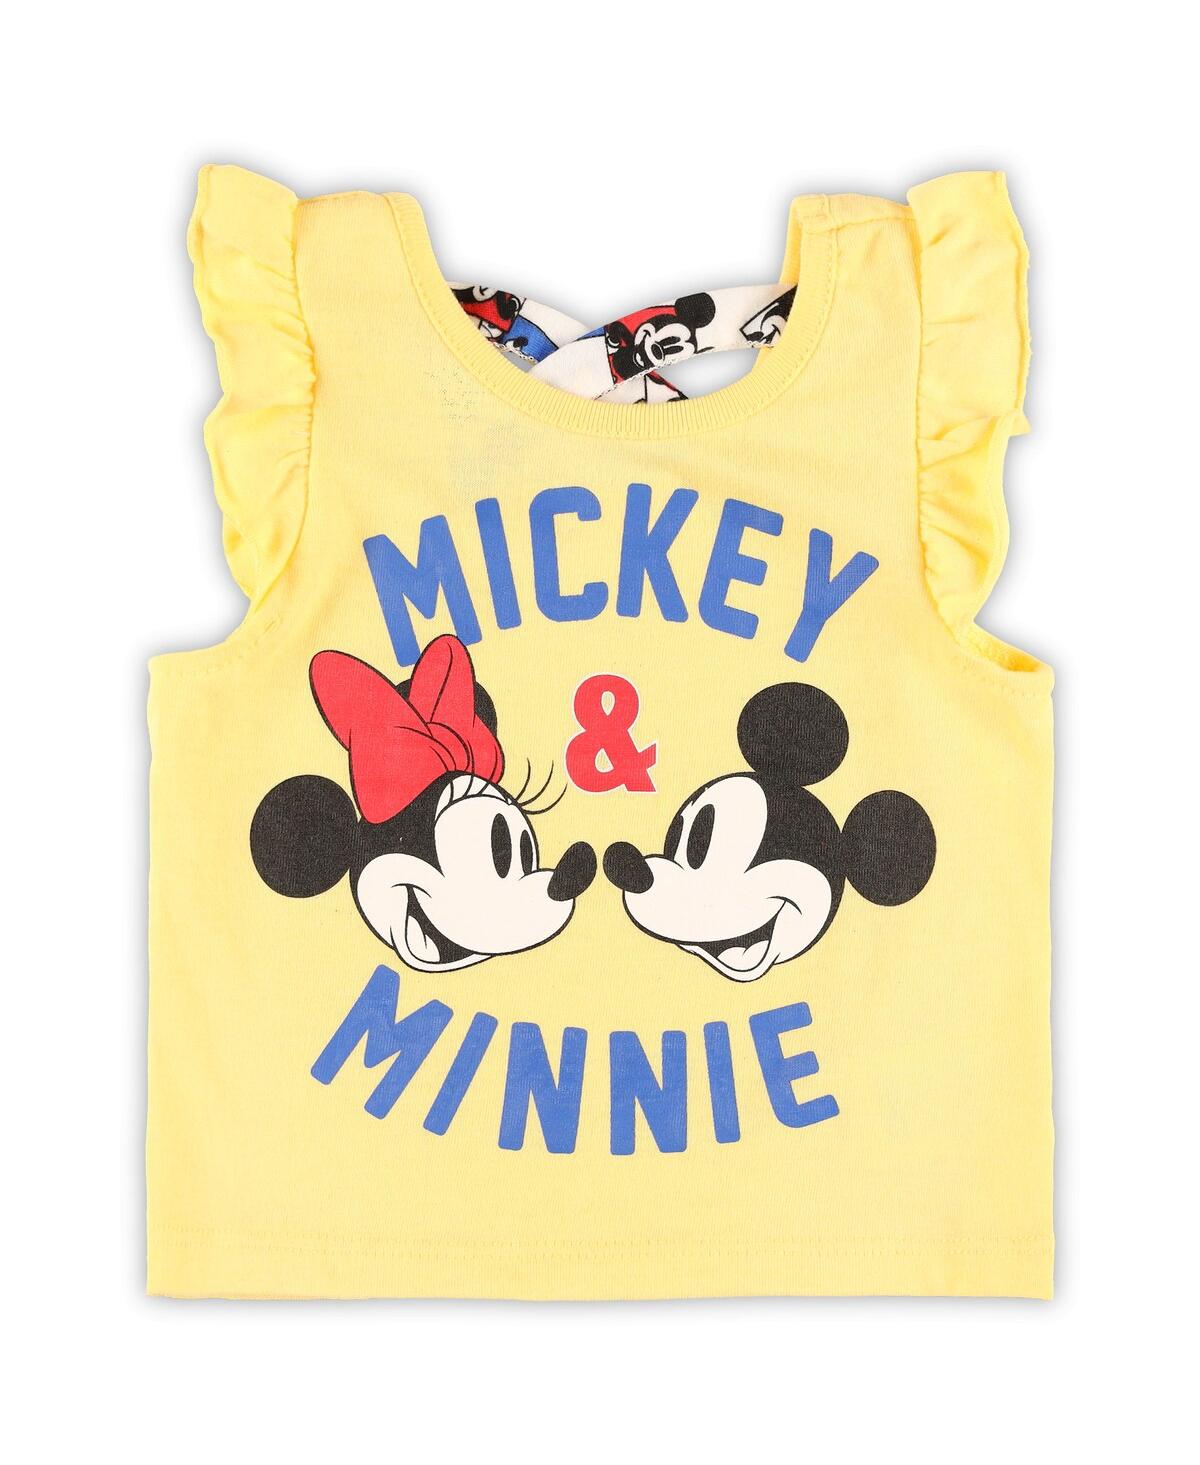 Shop Children's Apparel Network Baby Boys And Girls Minnie Mouse Red, White T-shirt And Shorts Set In Red,white